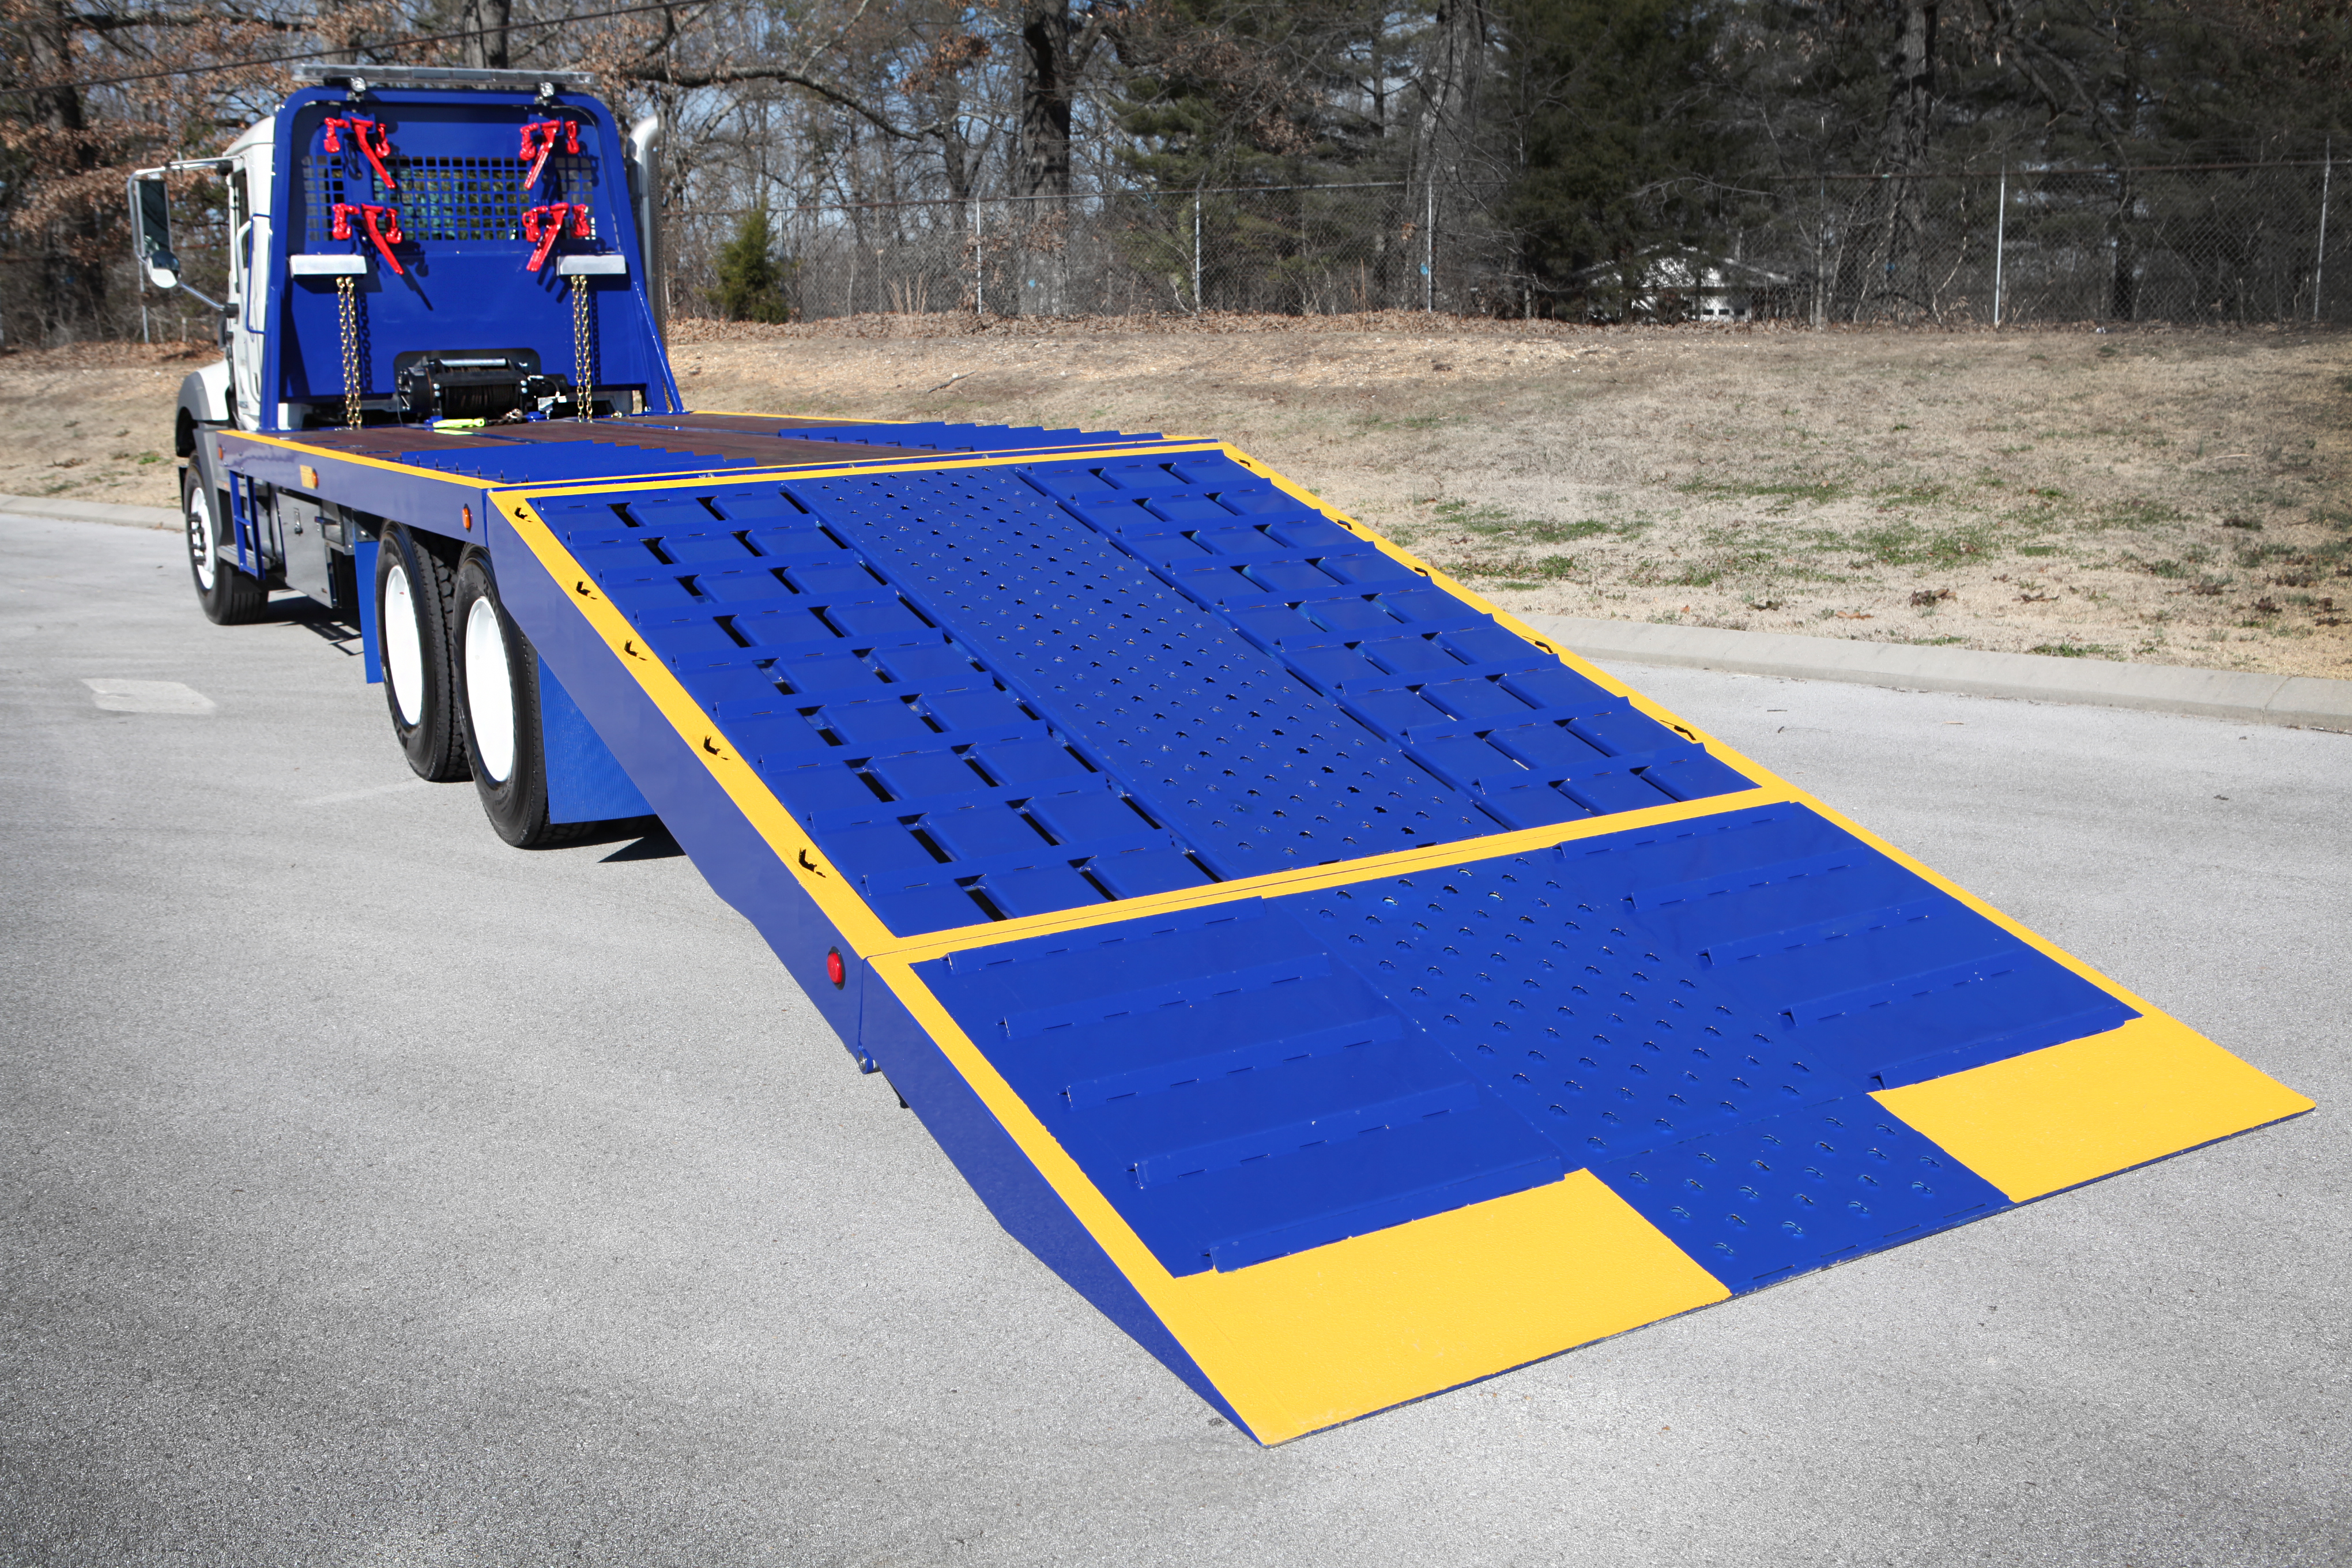 Titan® FRF is perfect for hauling heaving equipment